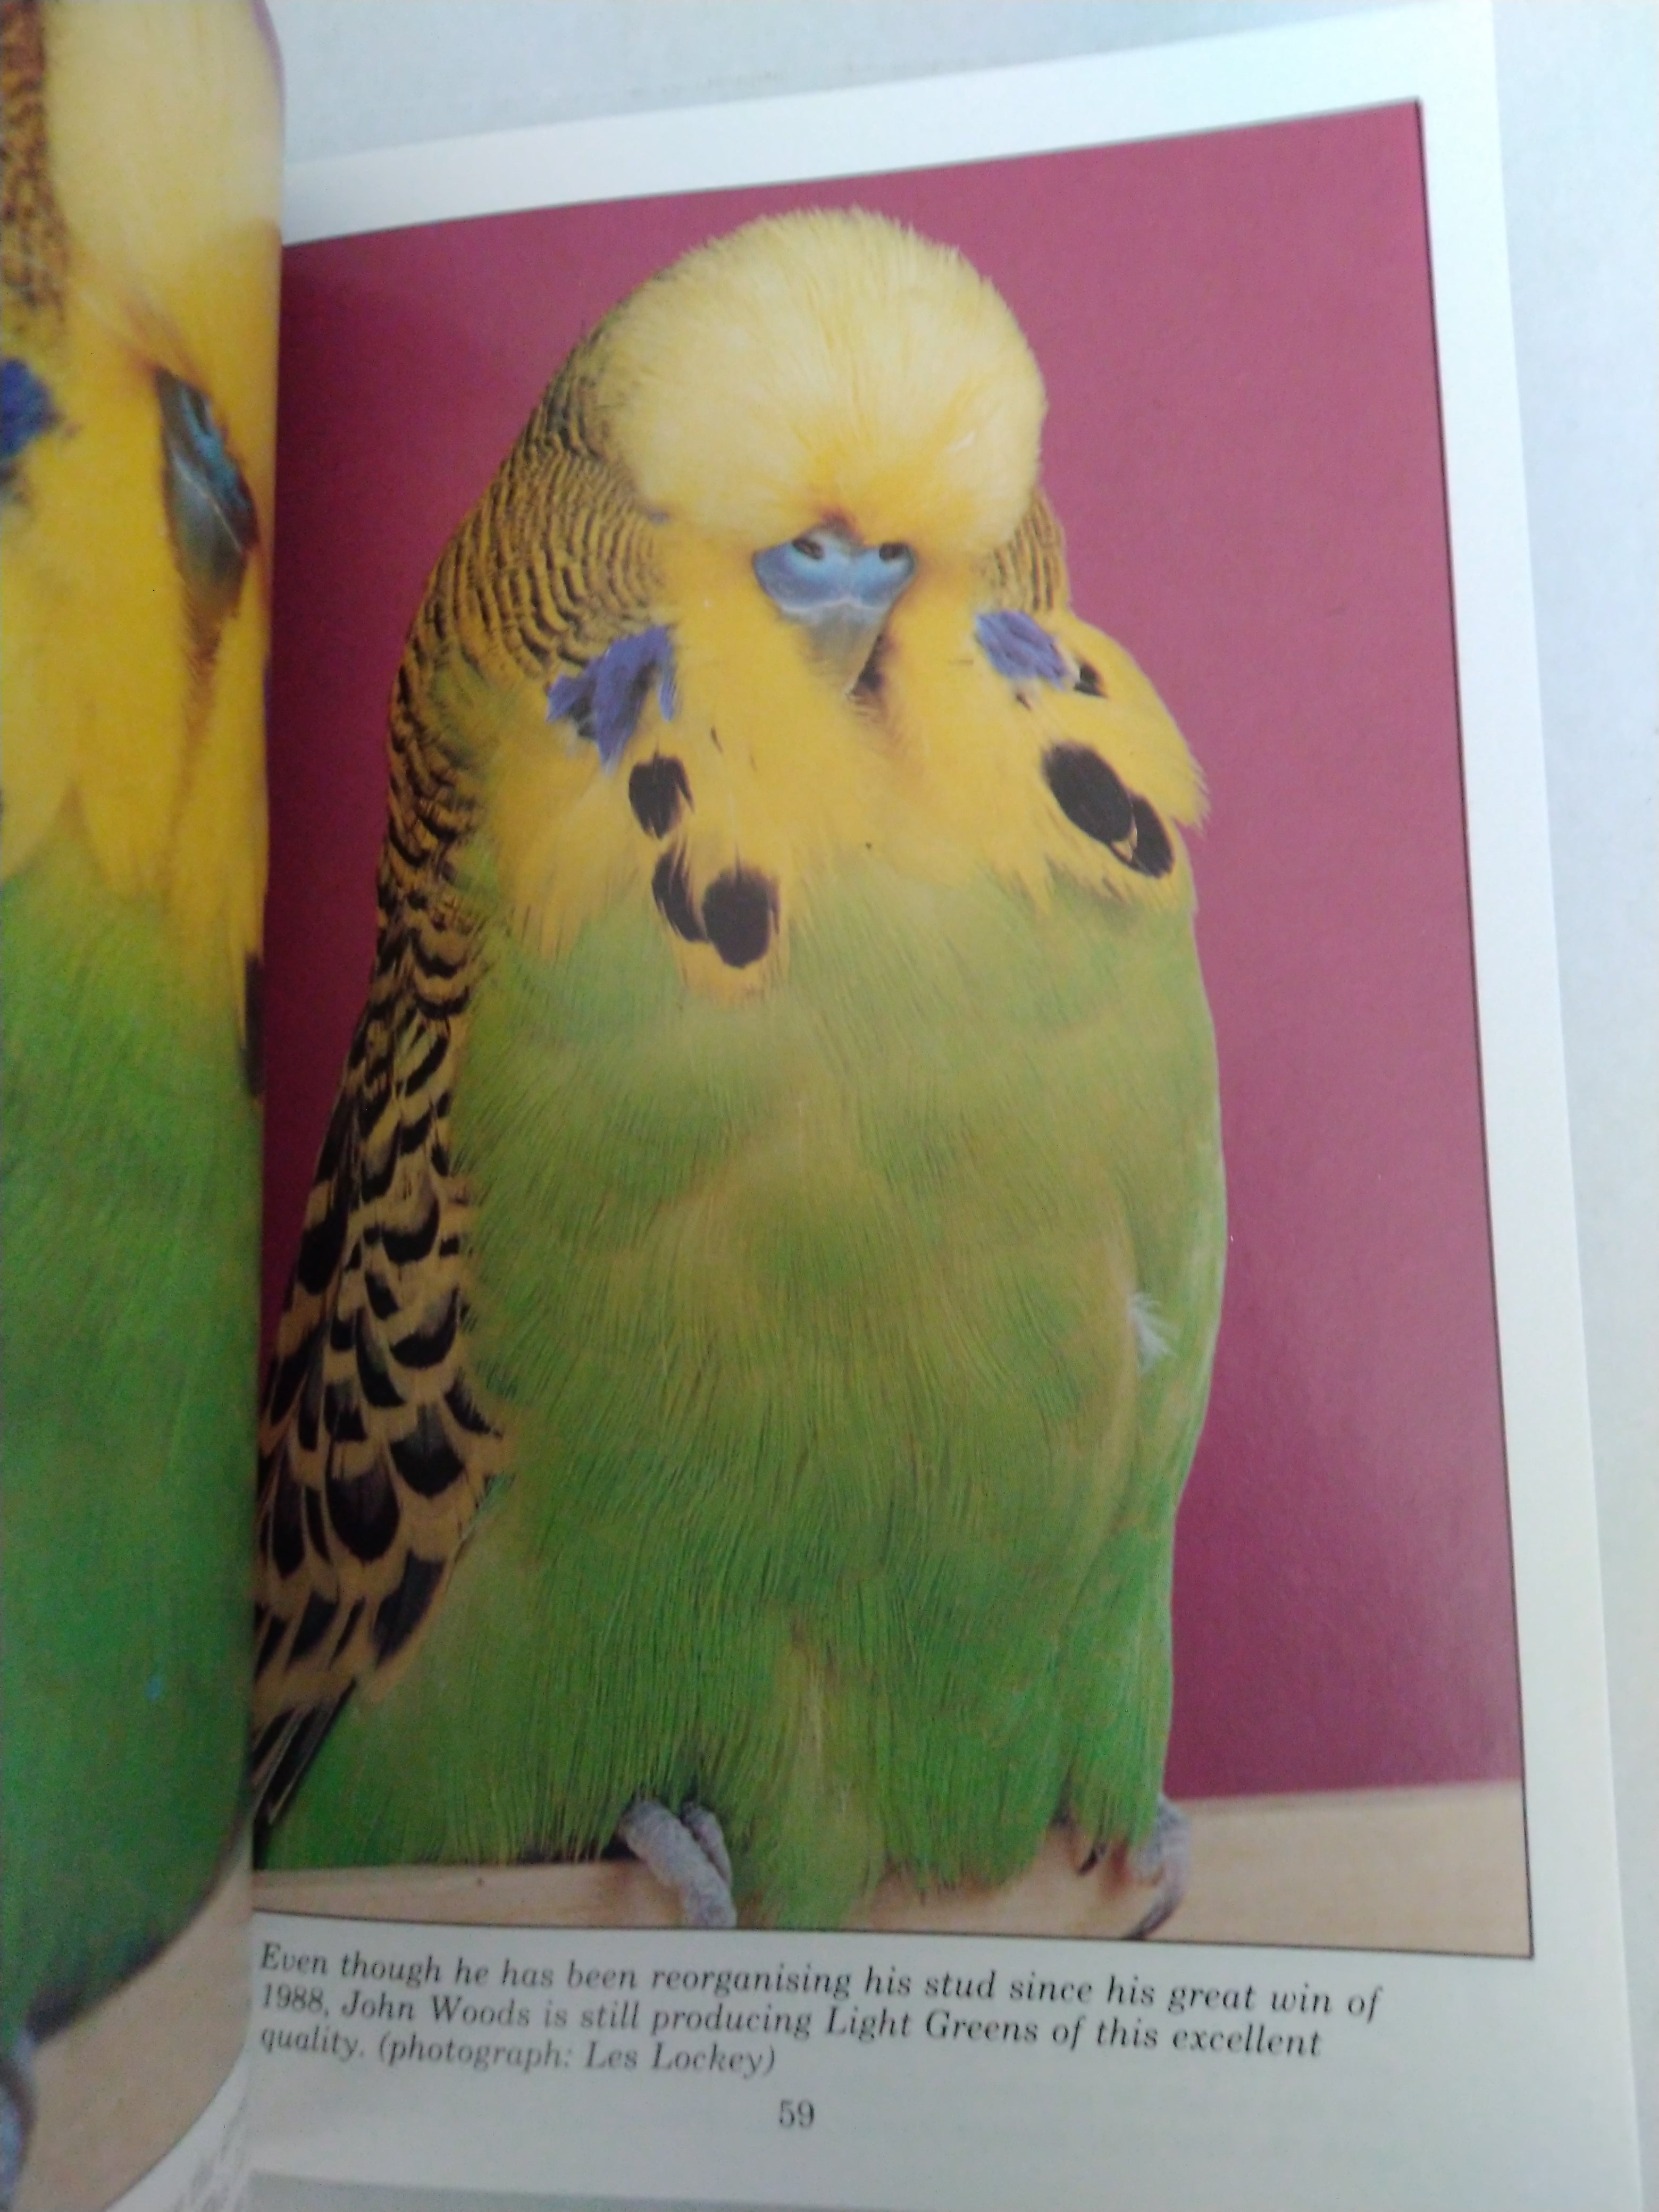 All About Green Budgerigars by Fred Wright and Roy Stringer (New)